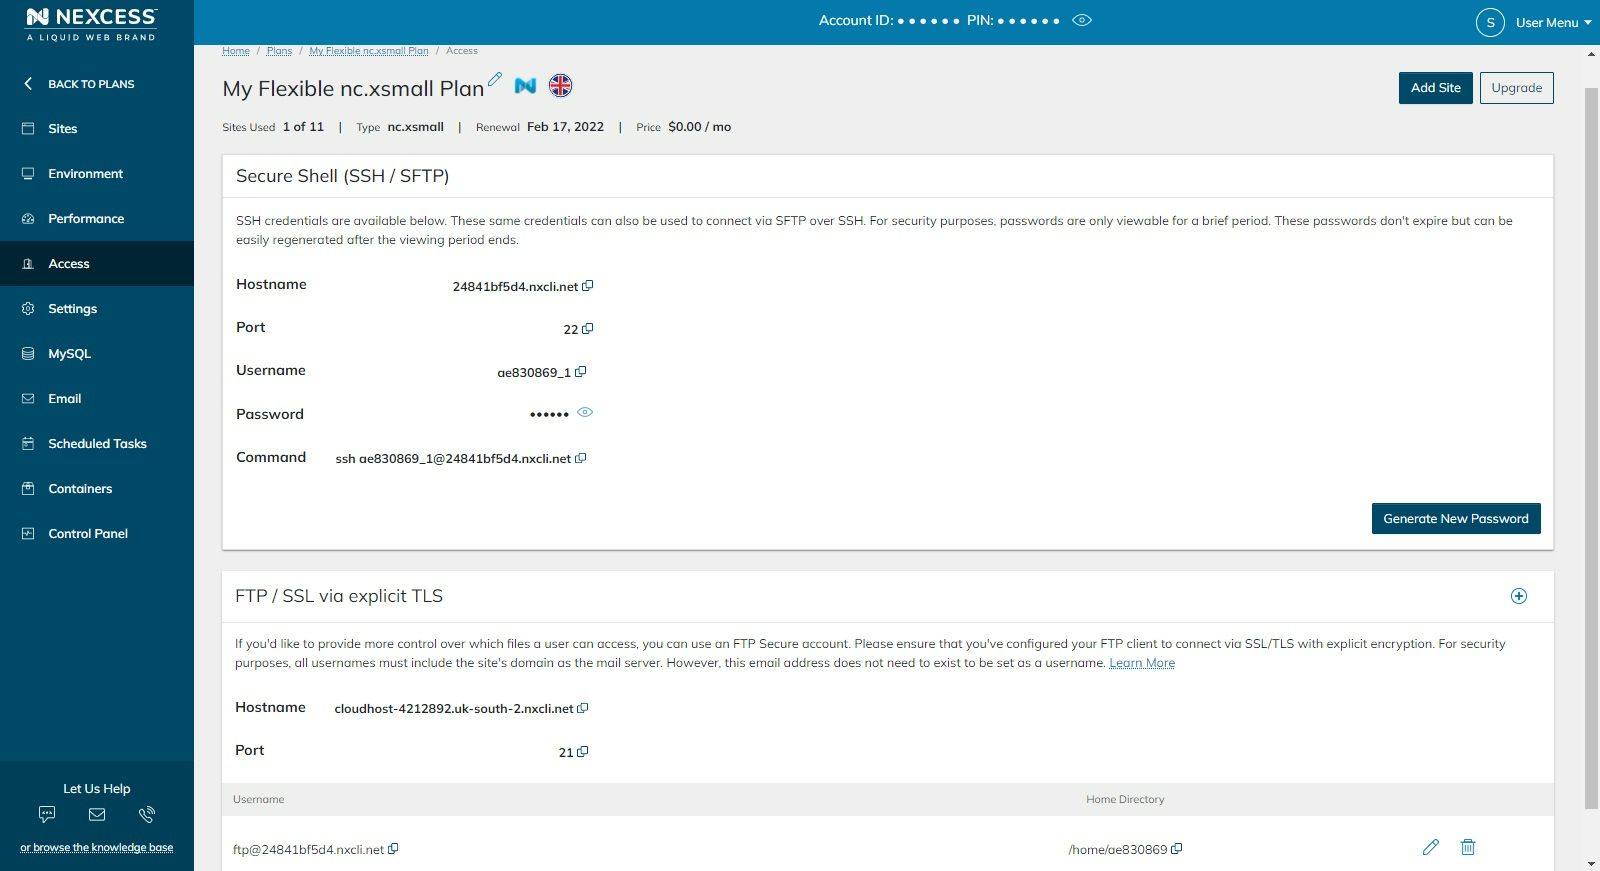 As with any Nexcess Cloud hosting plan, SSH, SFTP, and FTP credentials can be found in the Access section of the plan dashboard.